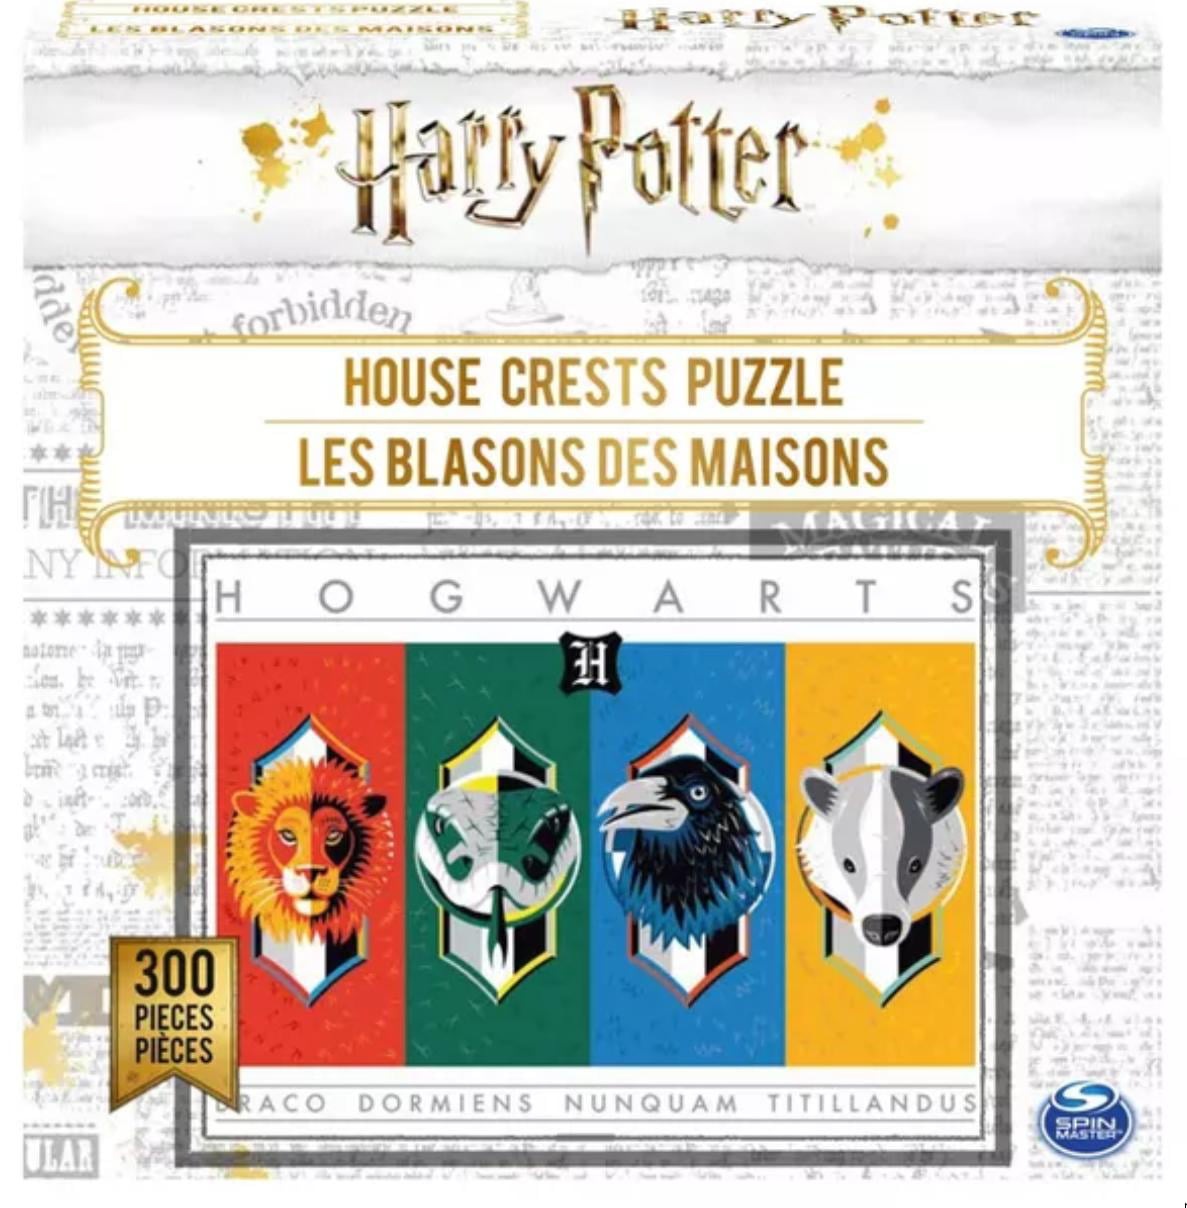 World of Harry Potter Collectors Jigsaw Puzzle Spiel 1000 Teile Quidditch 